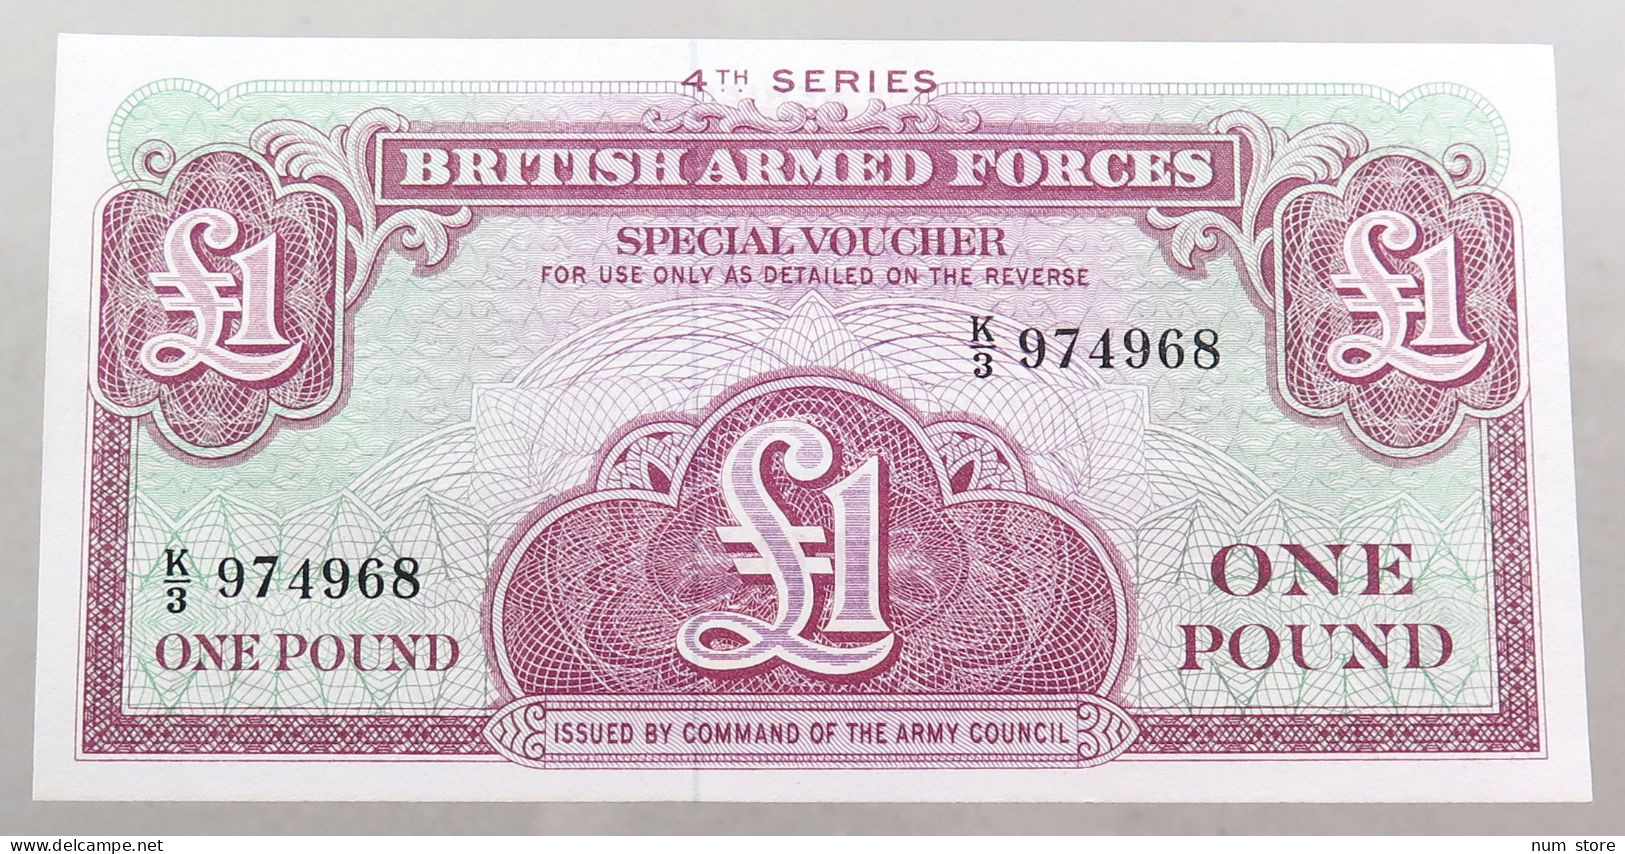 GREAT BRITAIN POUND  BRITISH ARMED FORCES #alb049 0175 - British Armed Forces & Special Vouchers